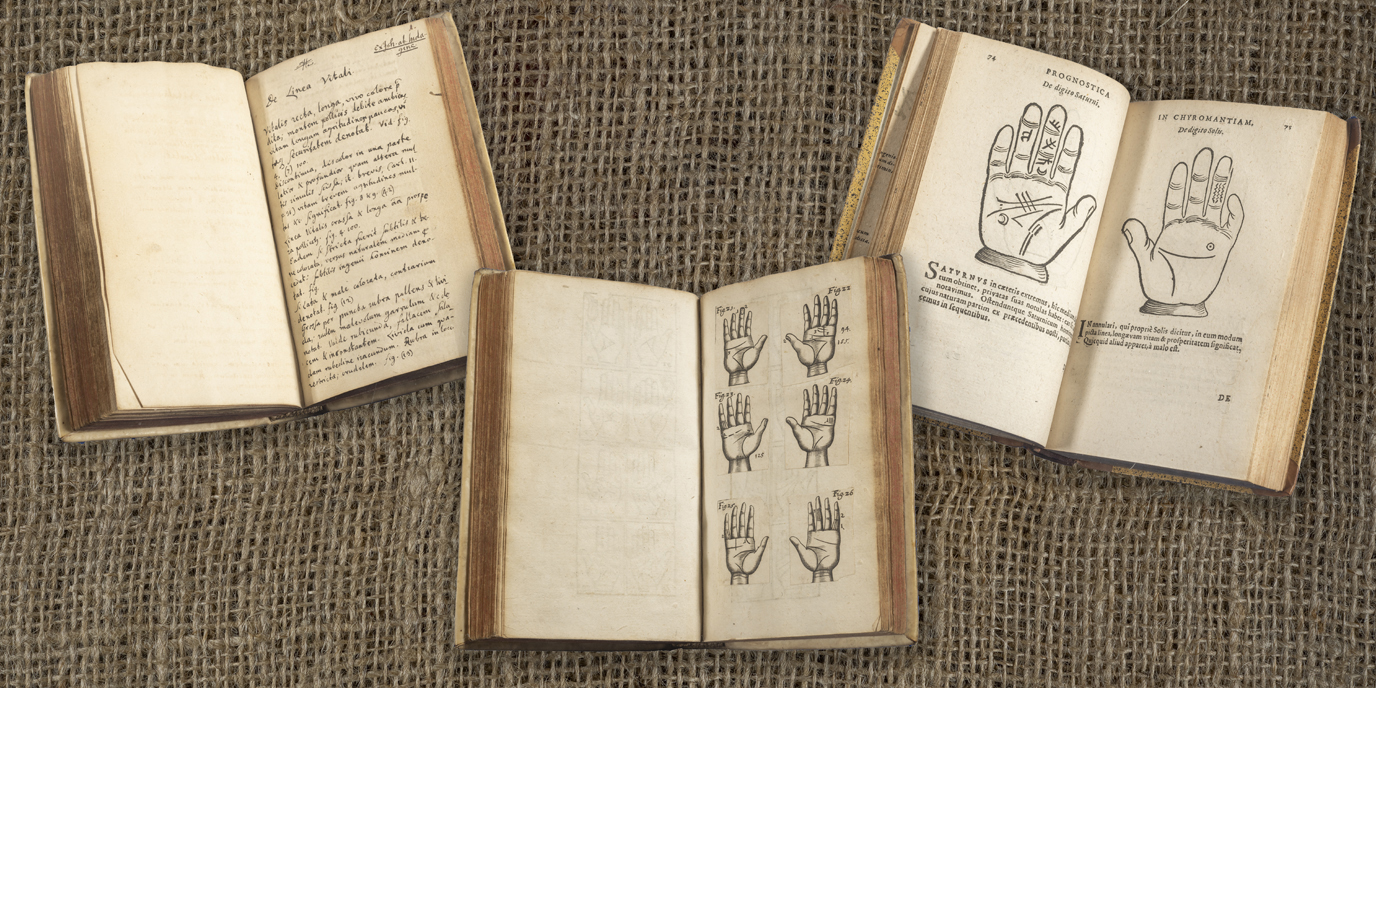 Another book with user marks is Nicolaus Pompeius' 'Praecepta chiromantica' (1682). In the back of this book on palm-reading, we find handwritten information from a book by Johannes ab Indagine. In addition to this we also see some chiromantic images pasted into the book.